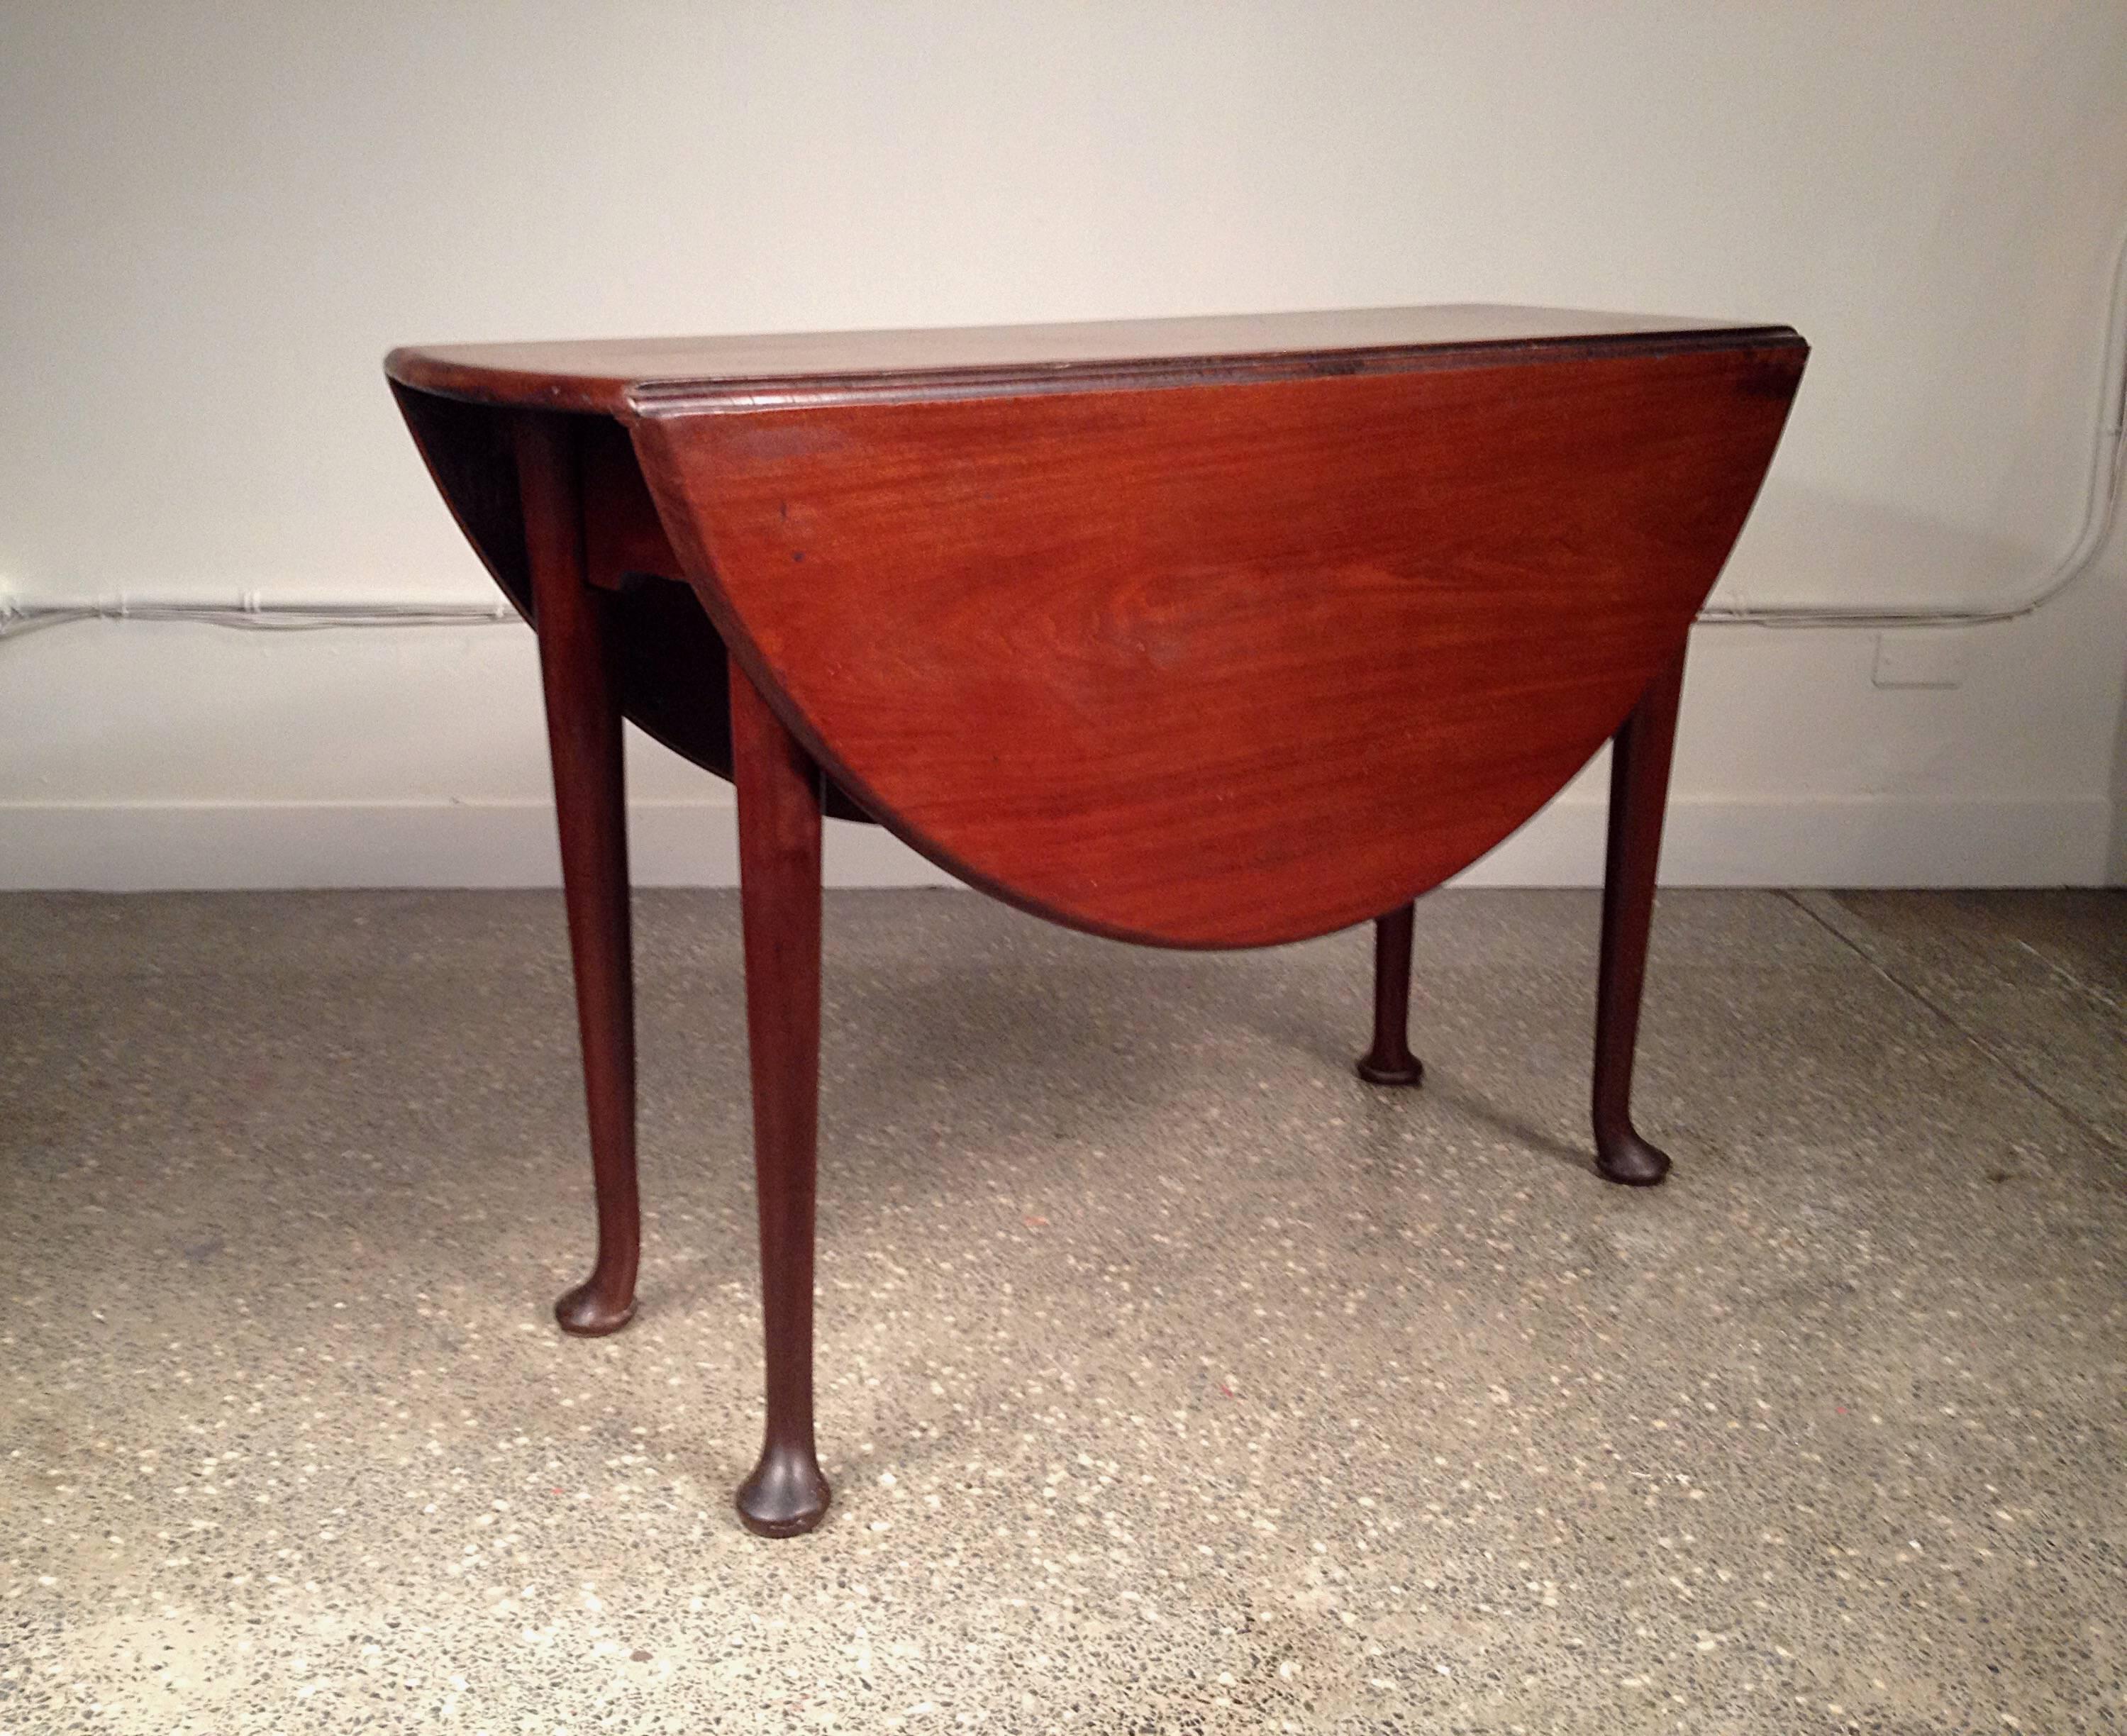 George II Mahogany Drop-Leaf Table In Excellent Condition For Sale In By Appointment Only, Ontario